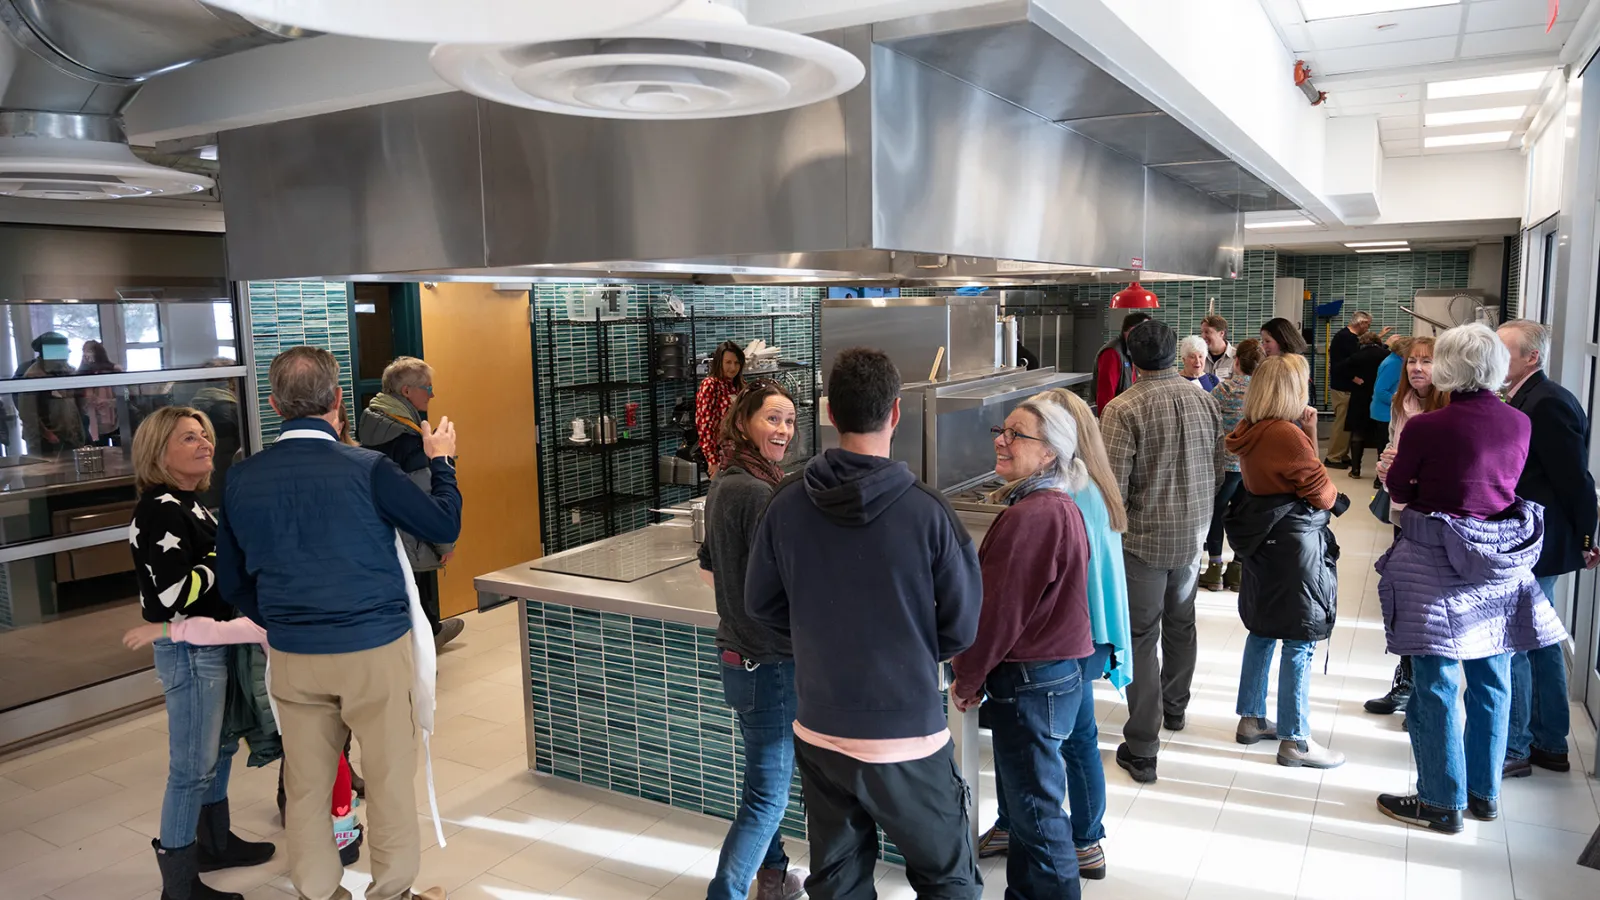 Ribbon-cutting attendees at the CMC Aspen Morgridge Teaching Kitchen public open house. Photo by Ben Suddendorf